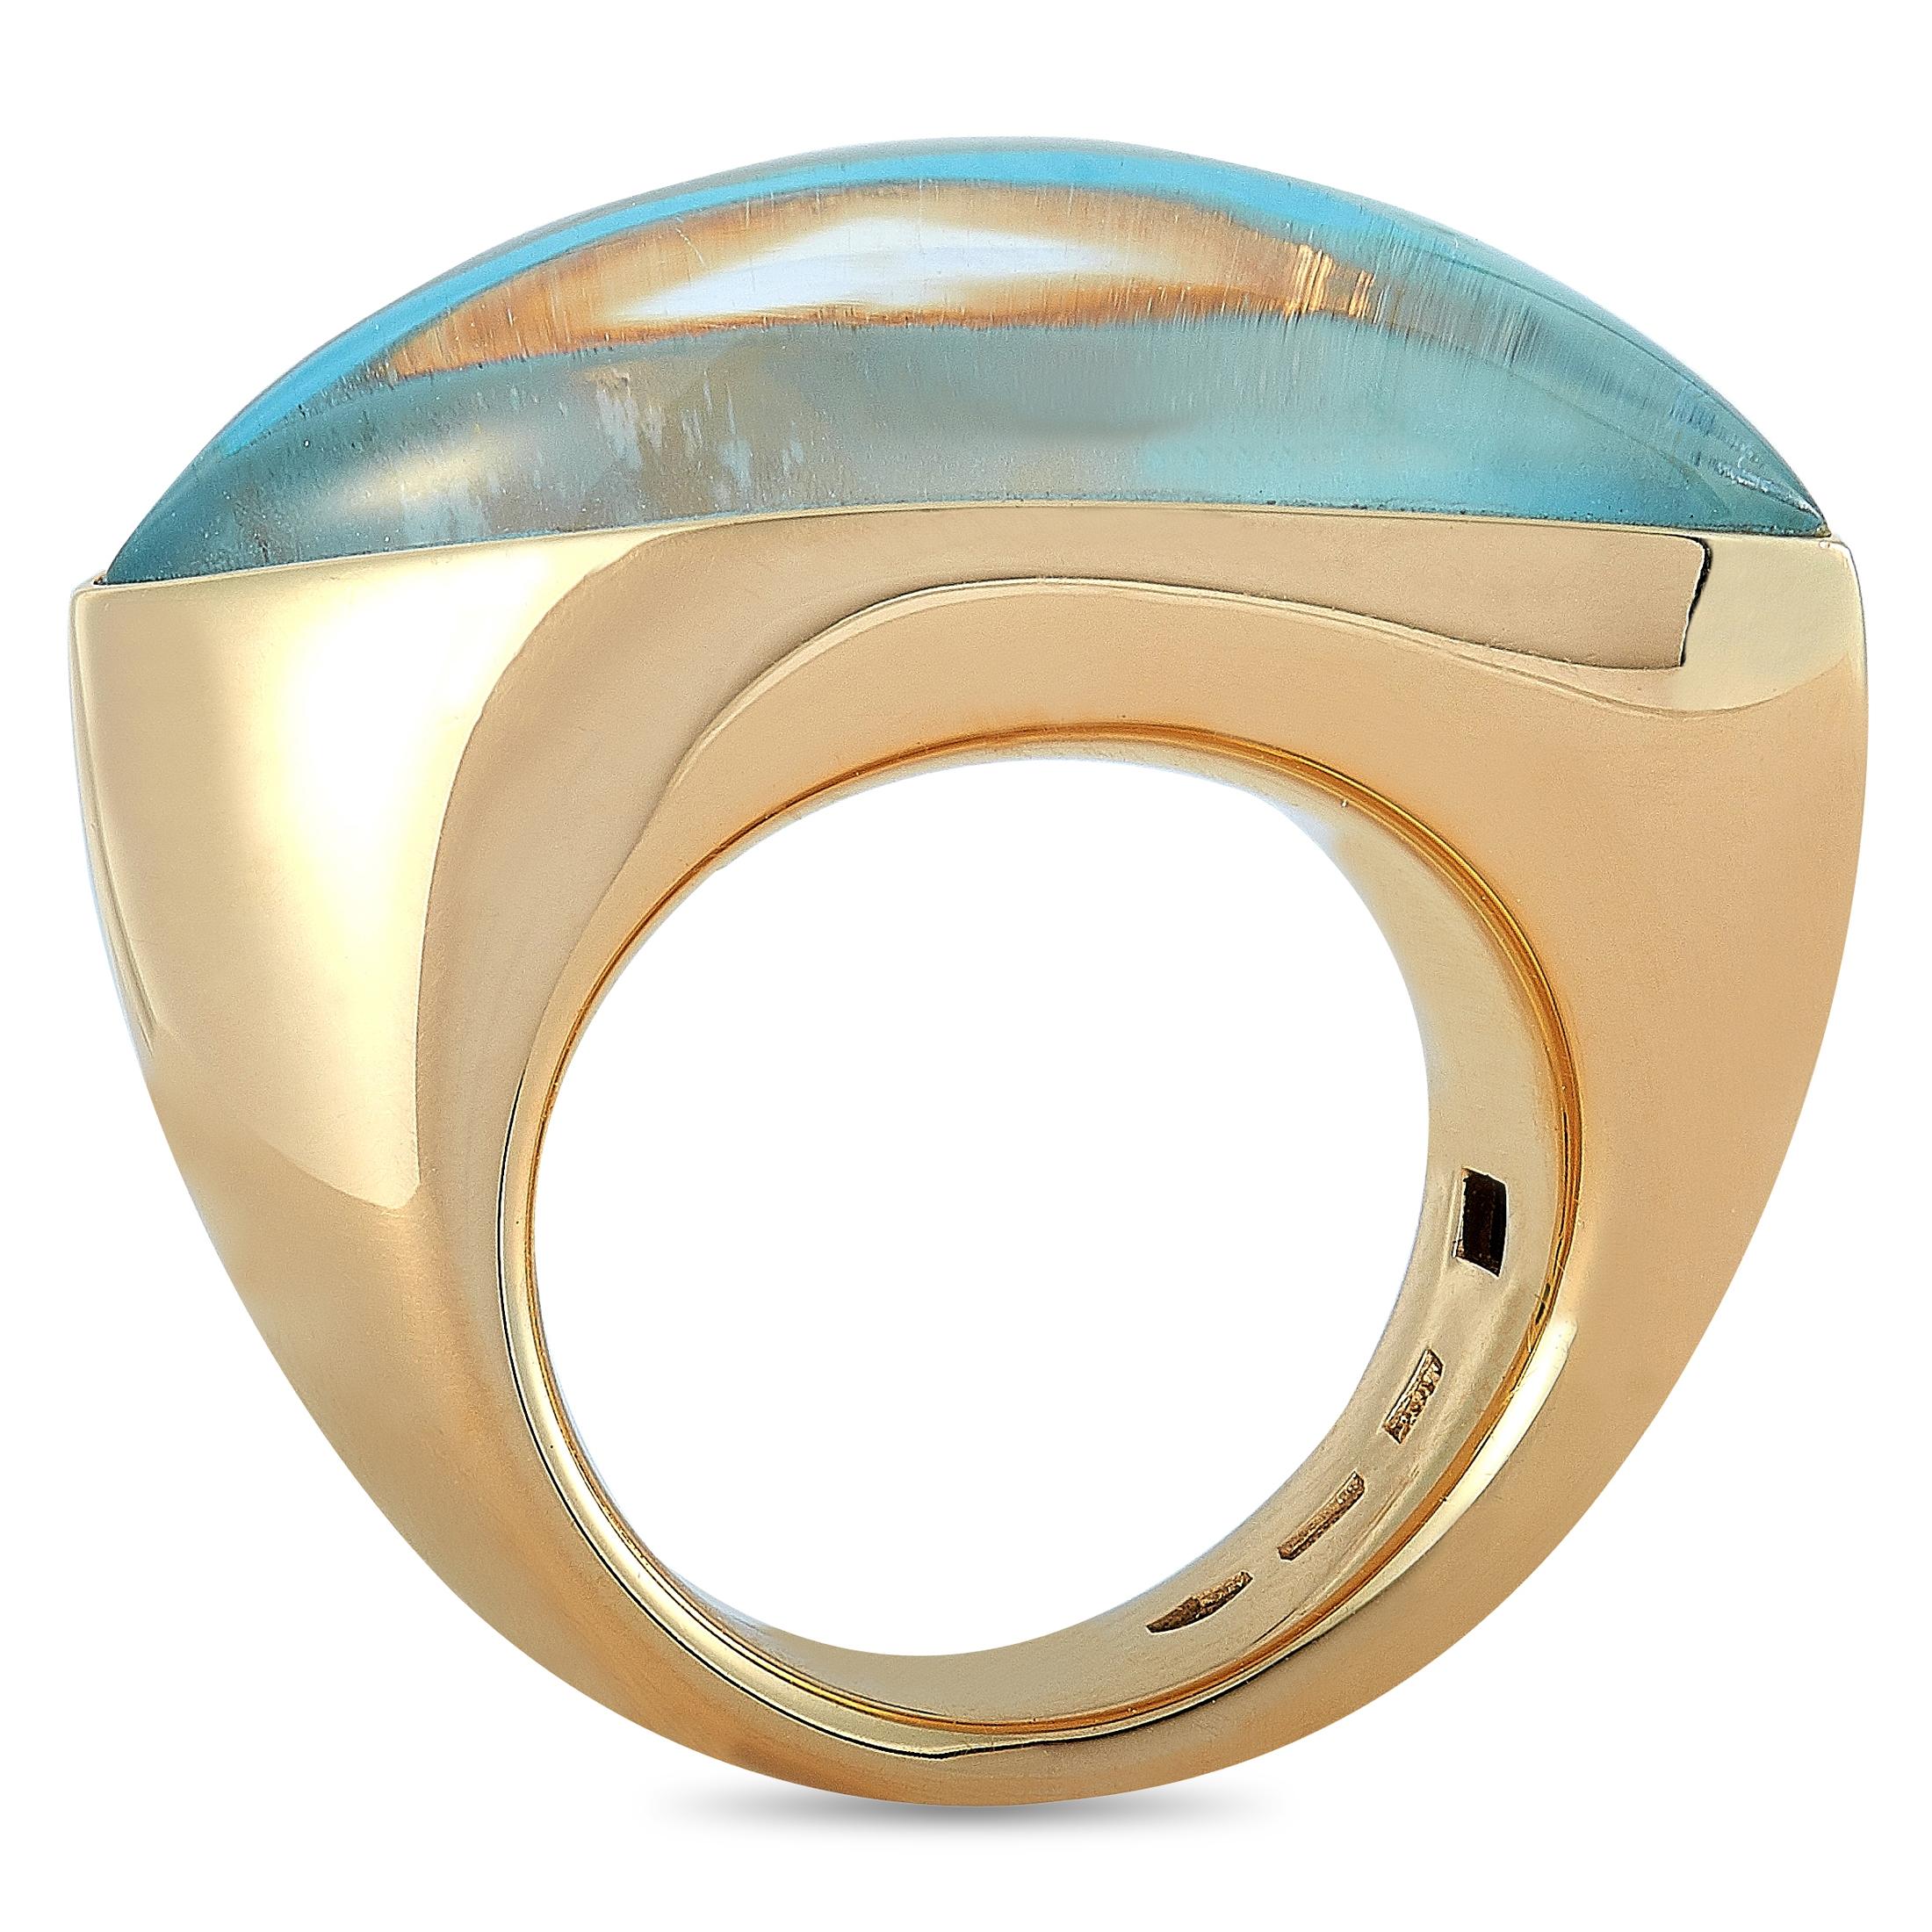 The Vhernier “Fuseau Piccolo” ring is made of 18K rose gold and embellished with turquoise and rock crystal. The ring weighs 18 grams and boasts band thickness of 6 mm and top height of 10 mm, while top dimensions measure 30 by 10 mm.
Ring Size: